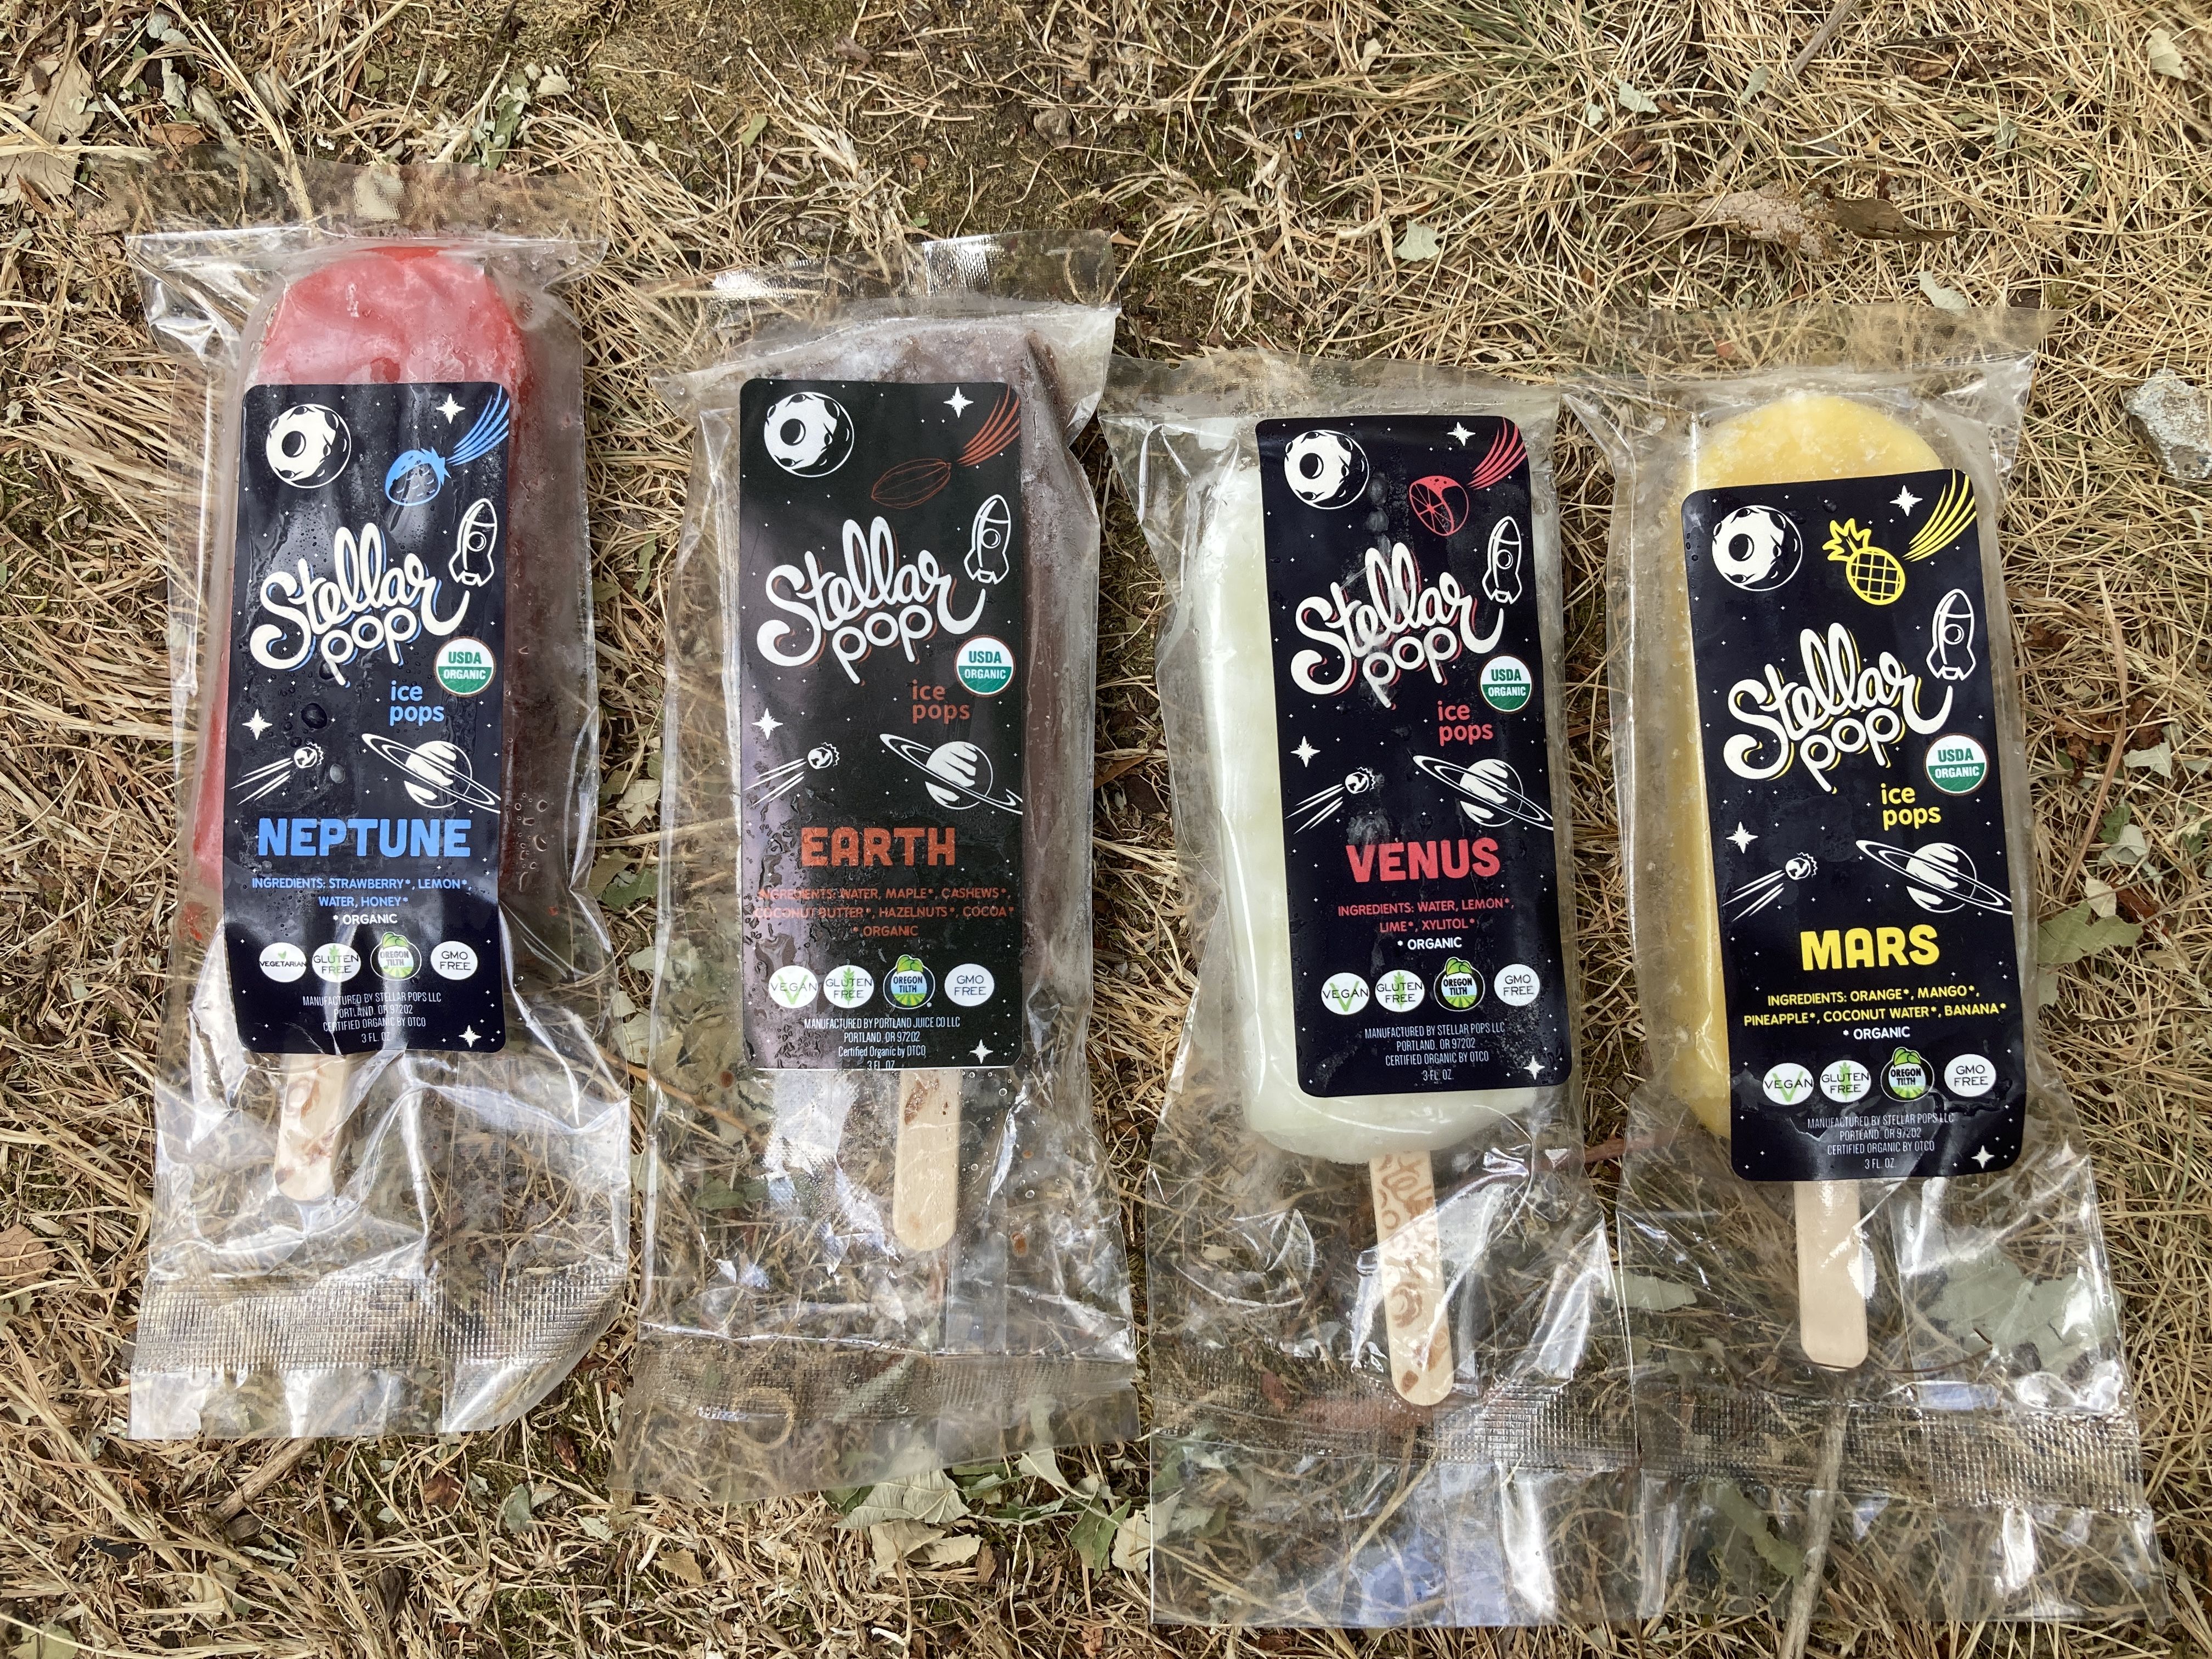 Four popsicles in wrappers with a black sticker that says Stellar Pop lined up on a background of dried grass. 